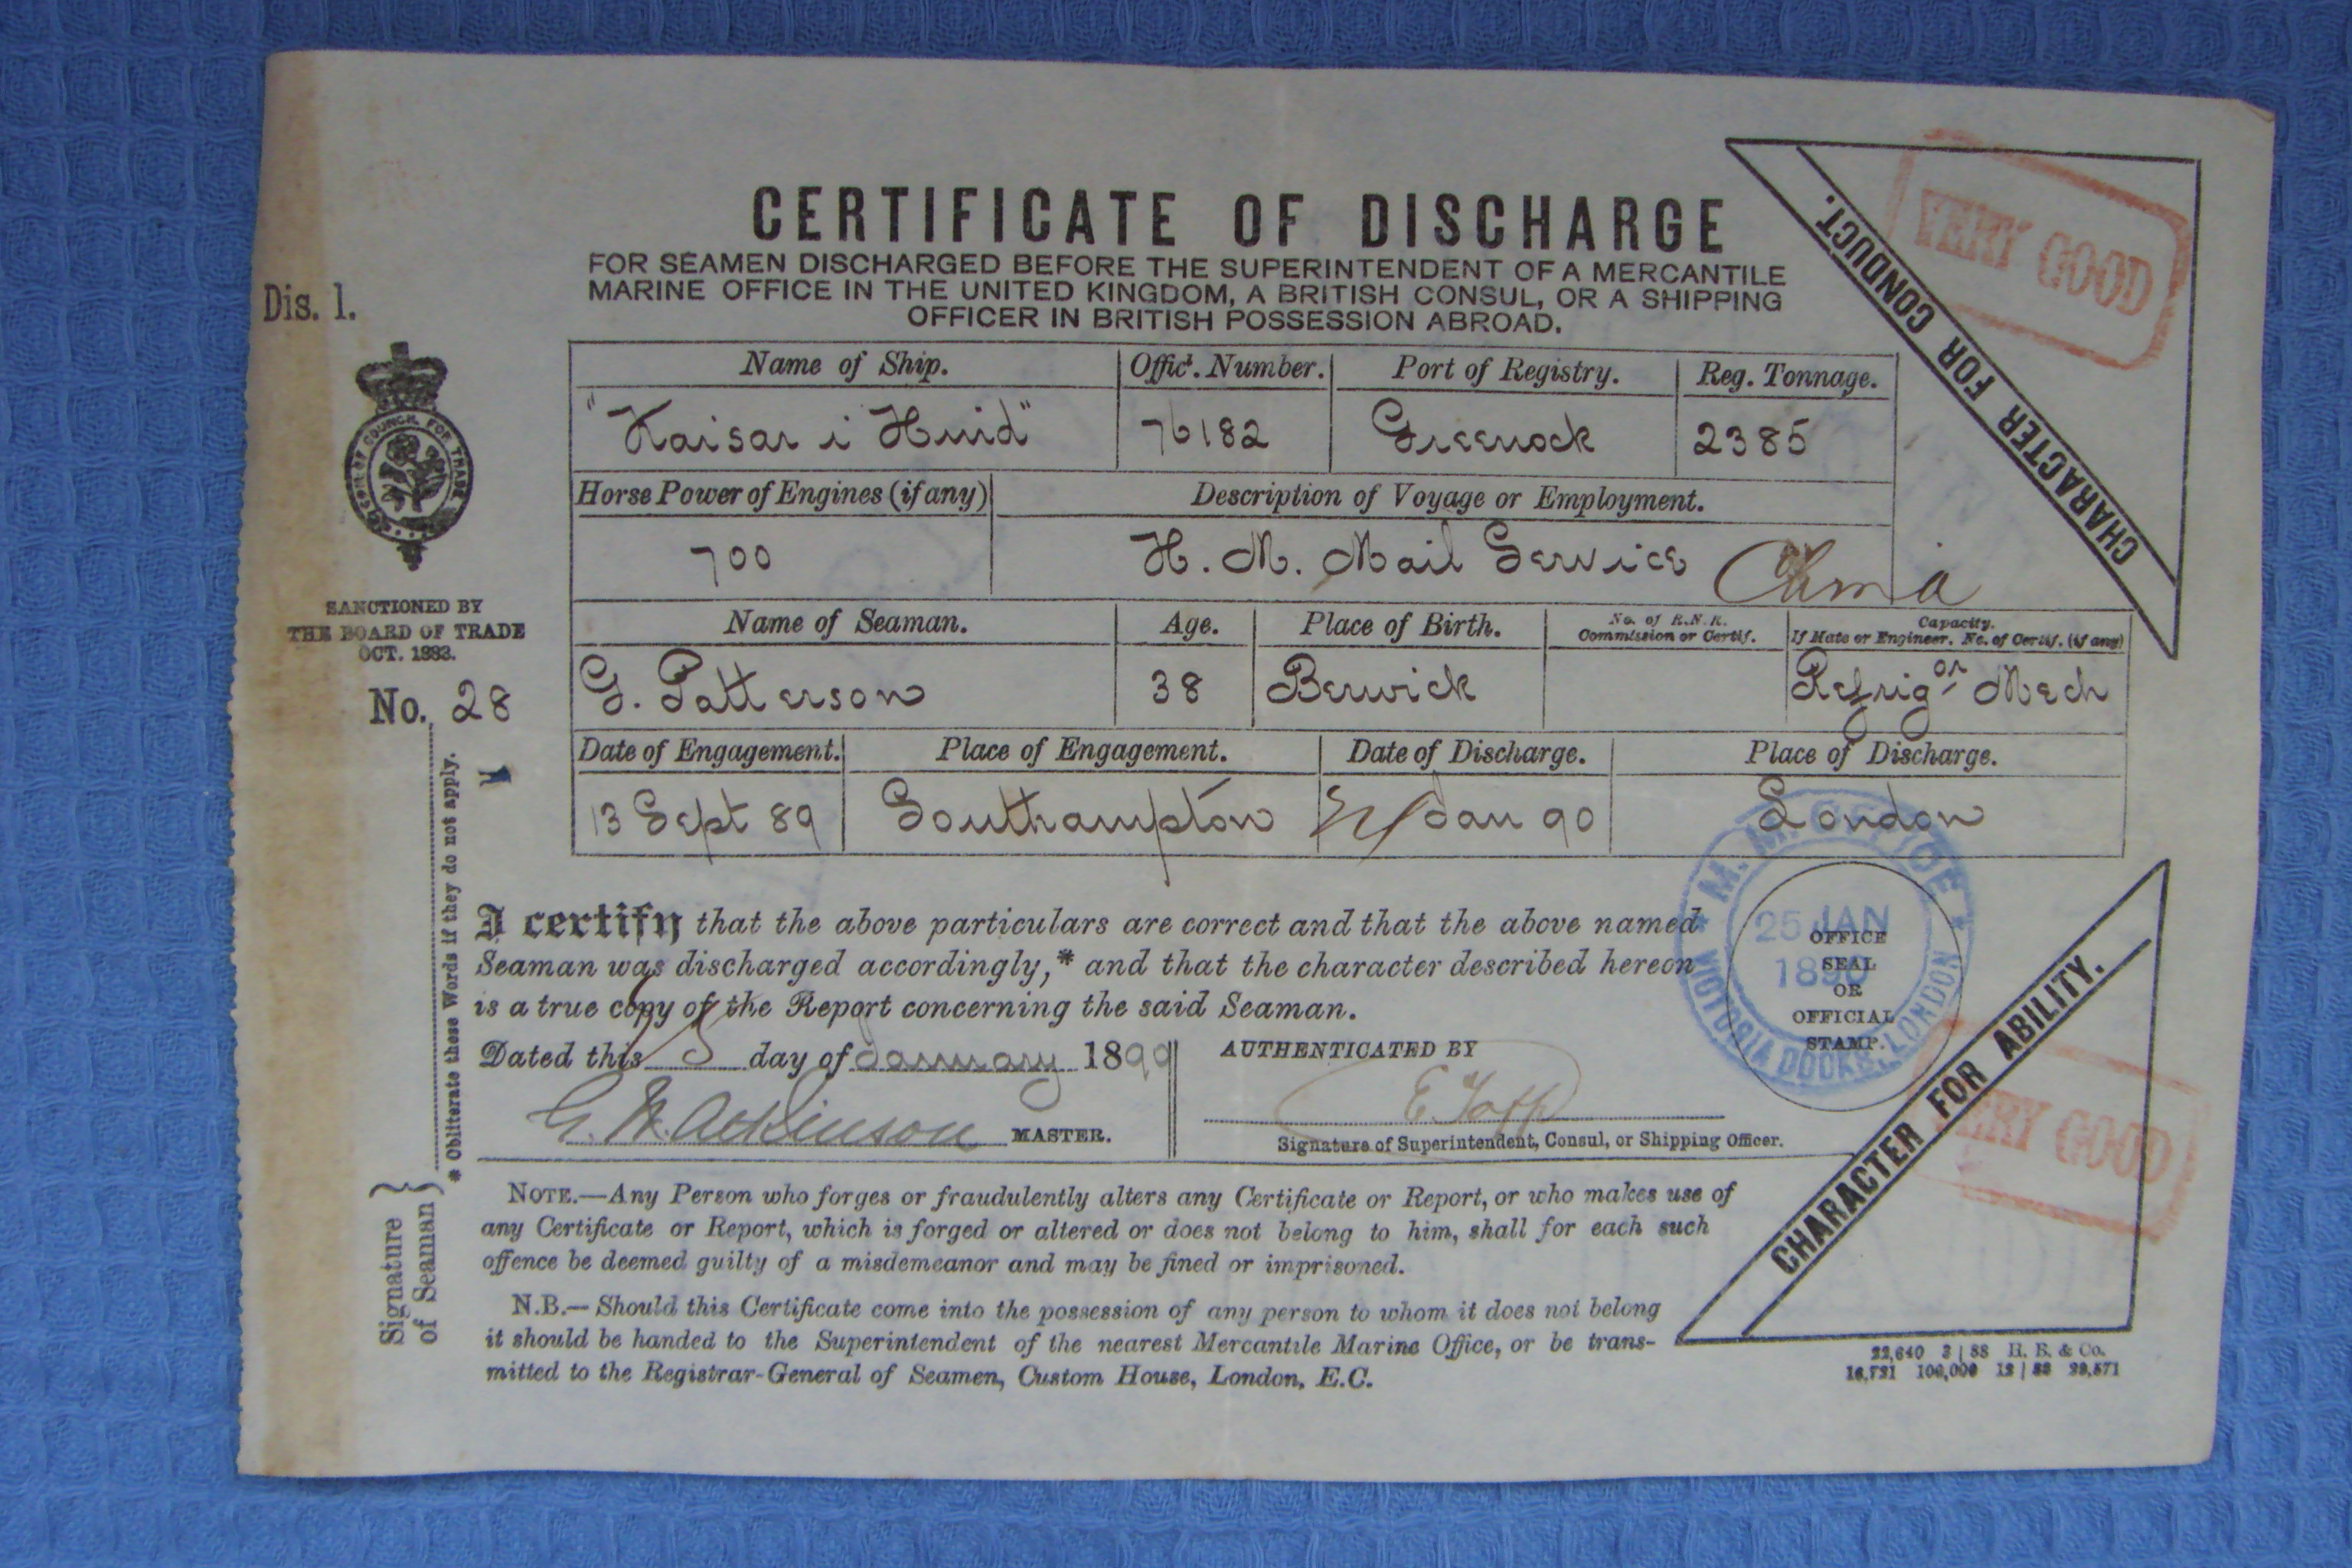 ORIGINAL 'CERTIFICATE OF DISCHARGE' FROM THE OLD P&O VESSEL 'KAISER HIND' DATED JANUARY 1890